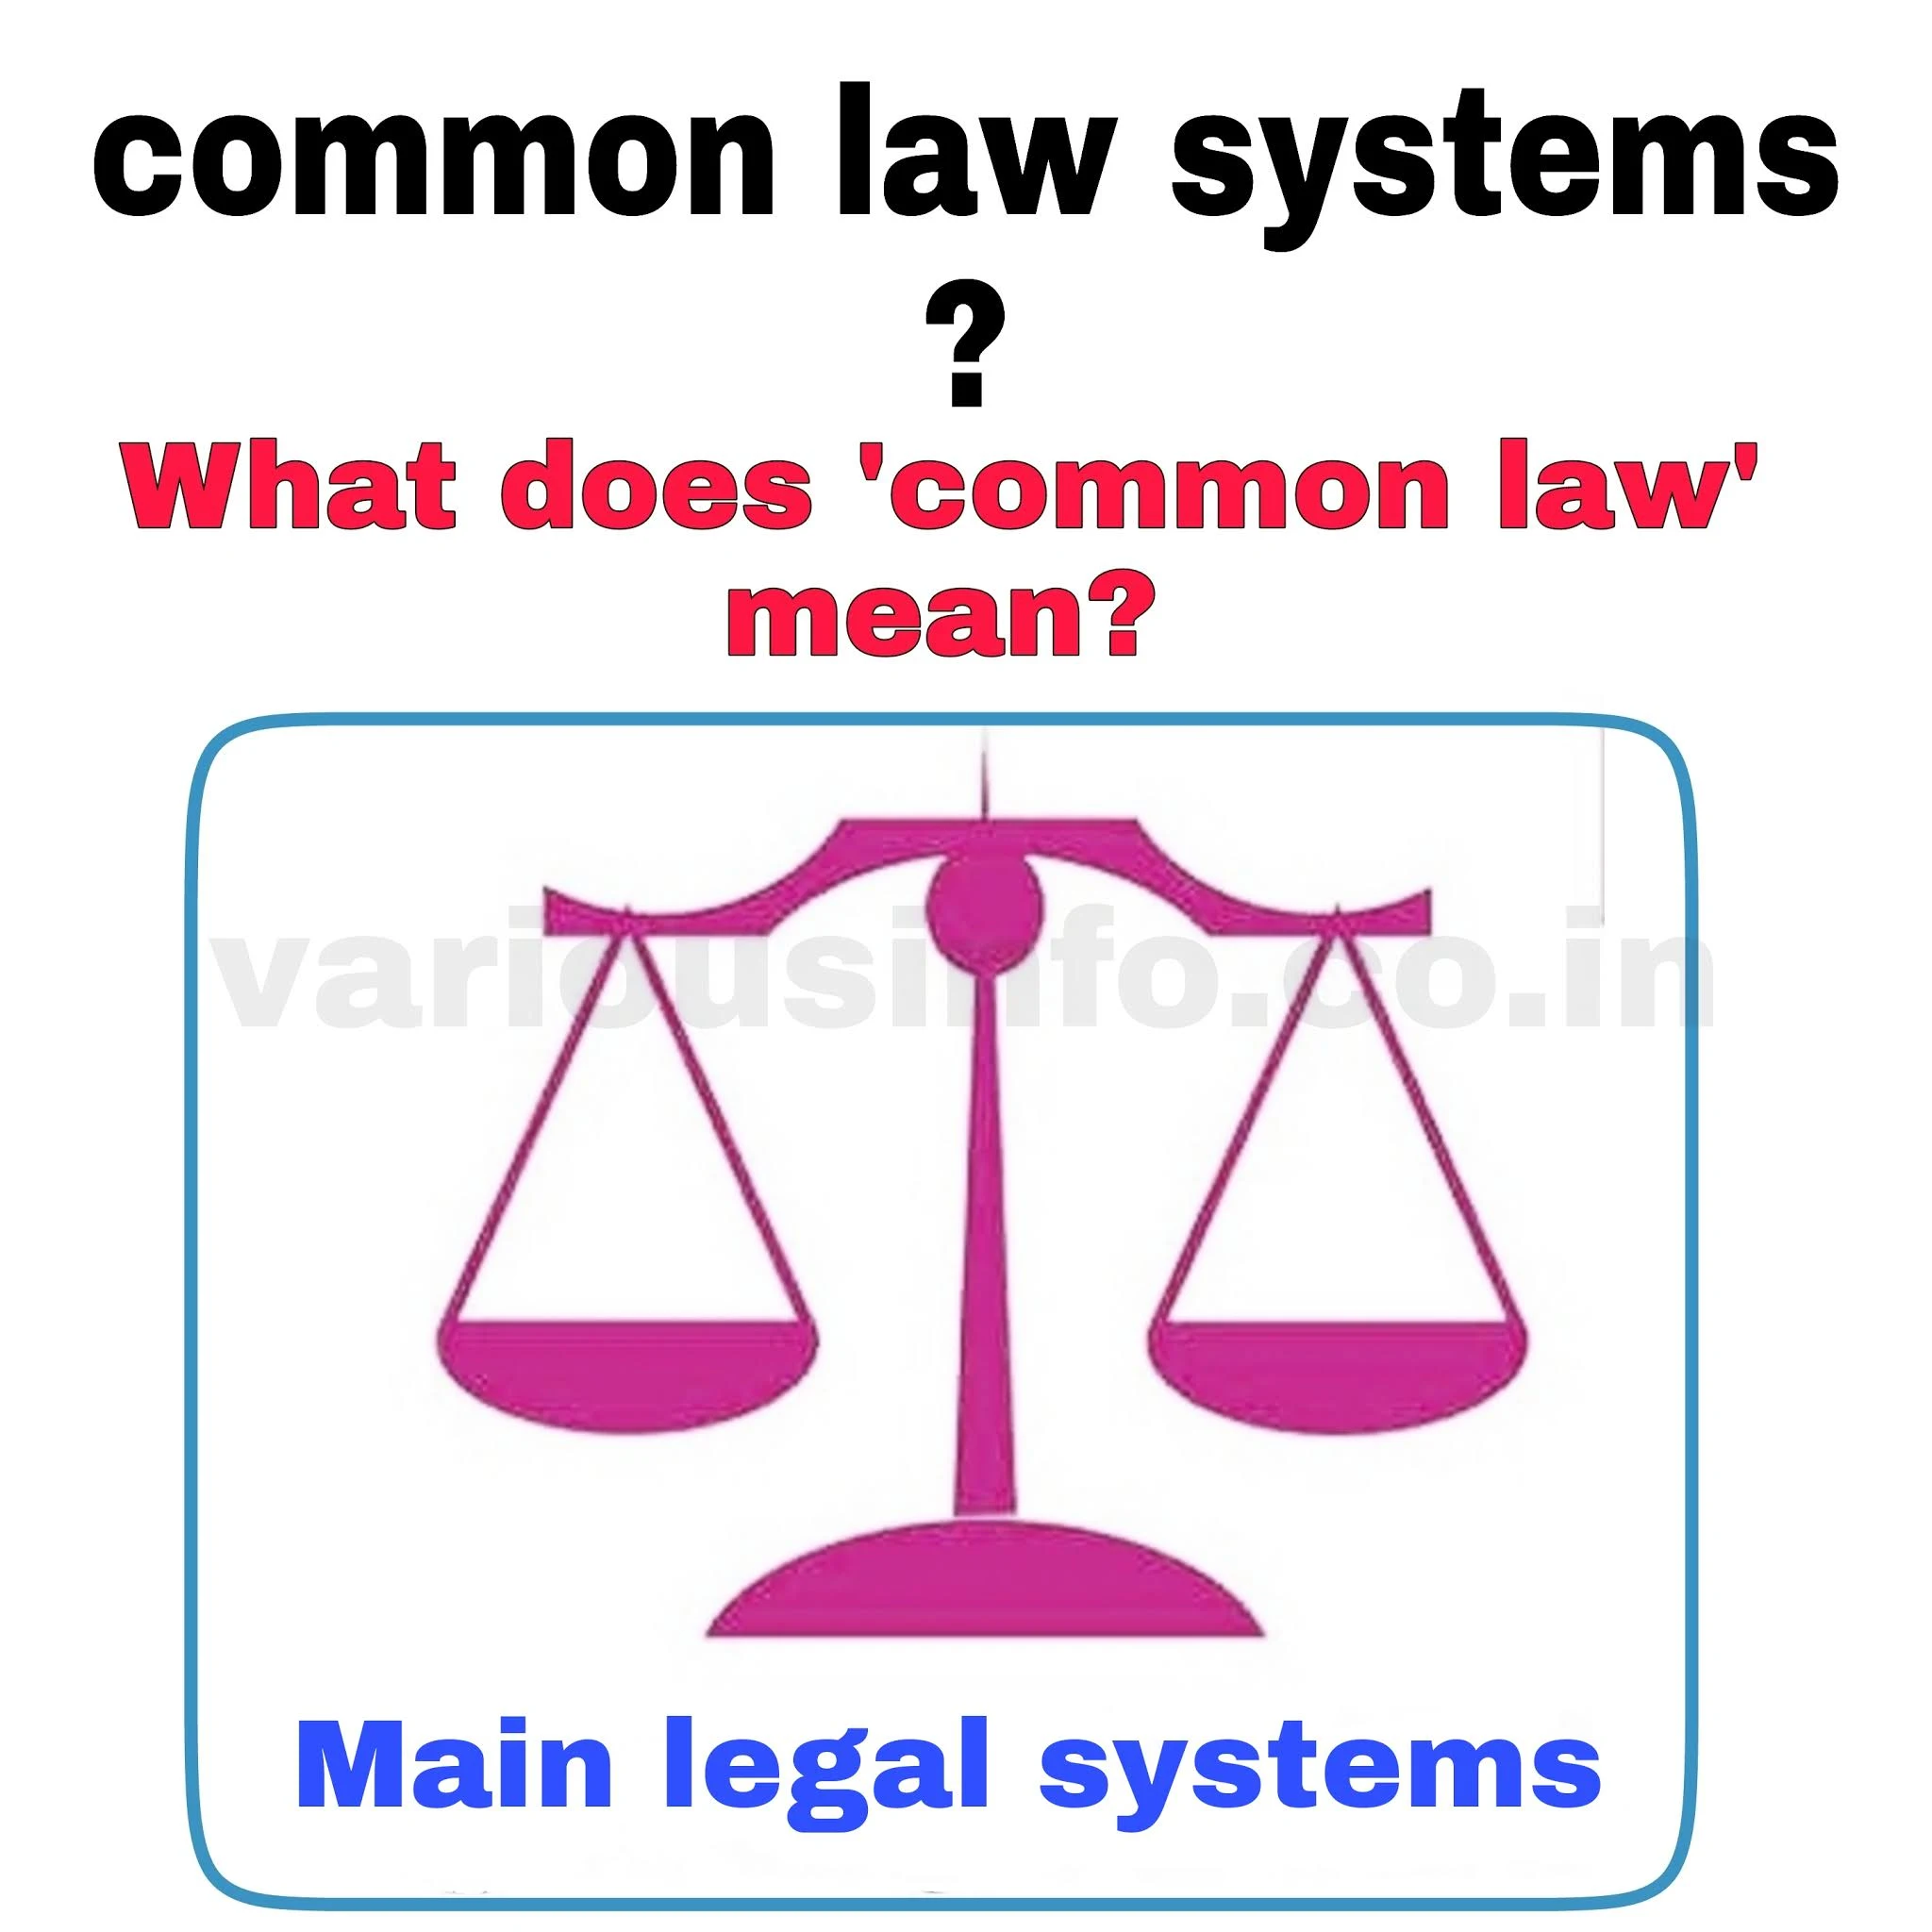 What are common law systems? What does 'common law' mean?